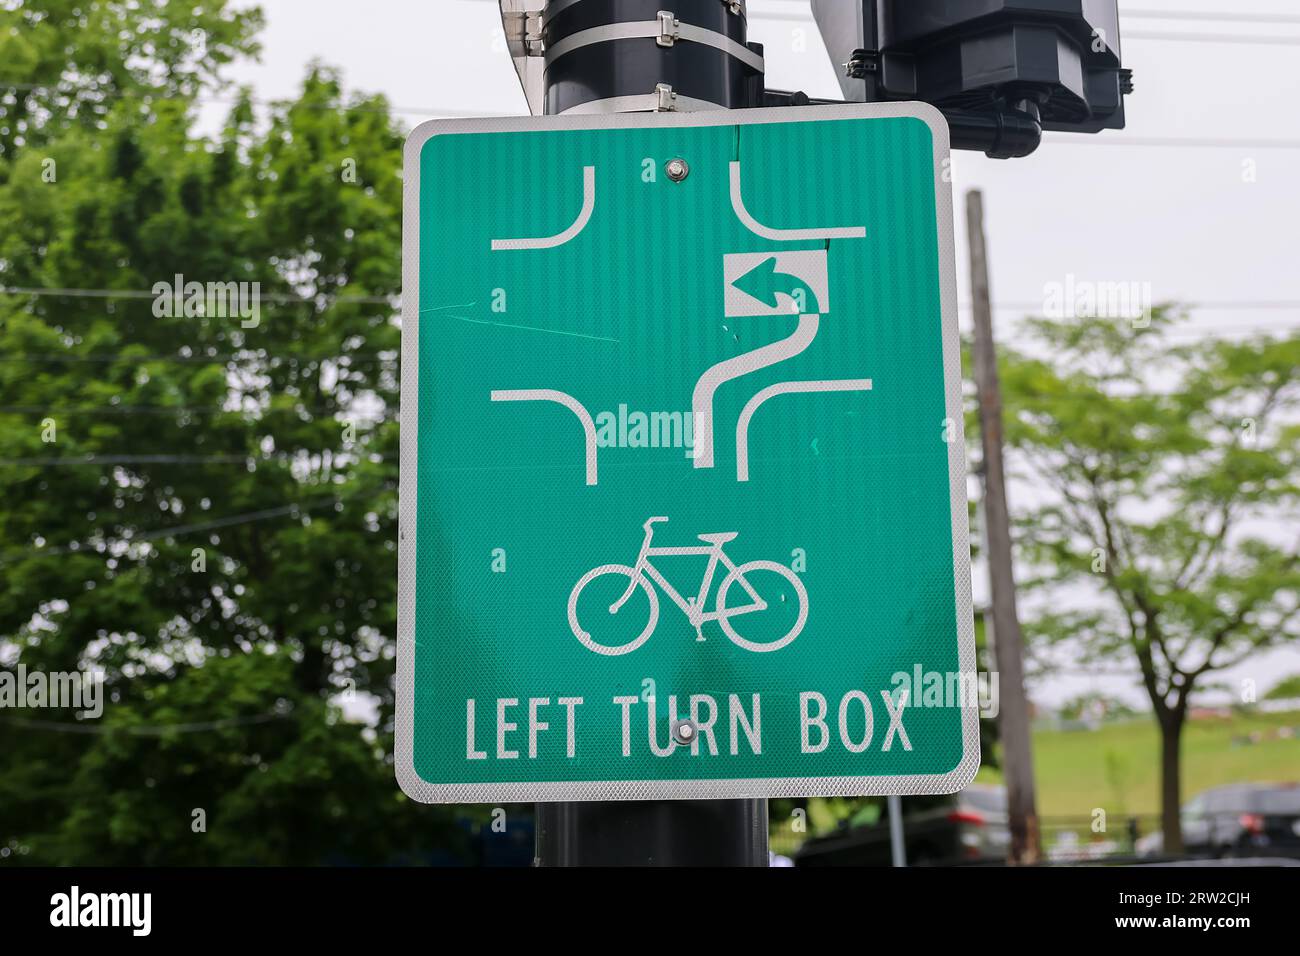 Bicycle lane LEFT TURN BOX with arrows indicating how to make the left turn for the bicyclists. Bike lane intersection Stock Photo